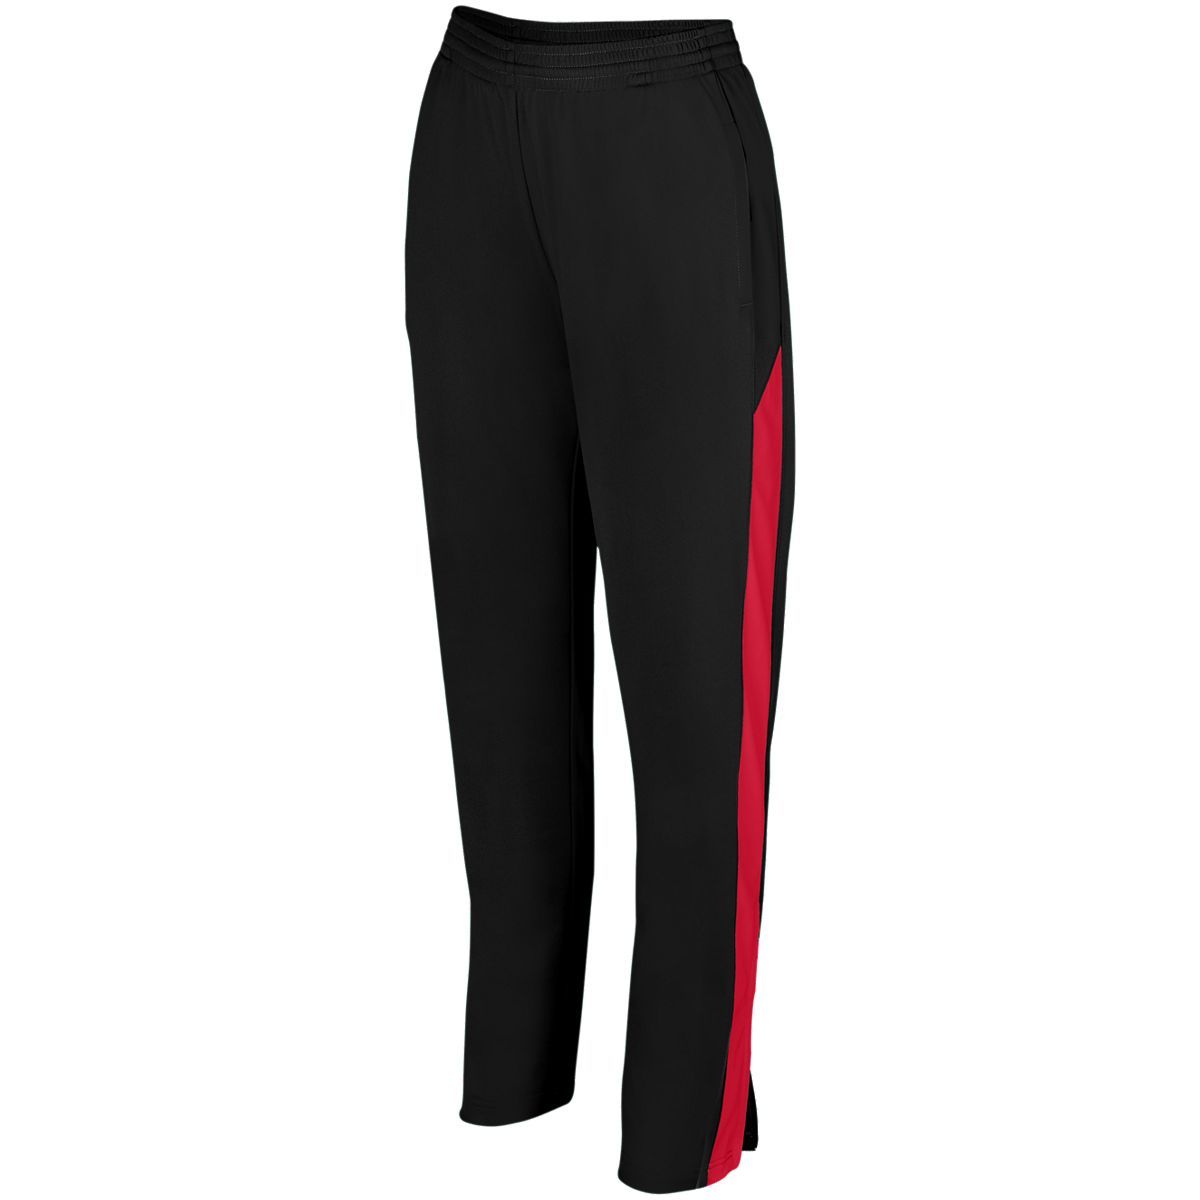 Augusta Sportswear Ladies Medalist Pant 2.0 in Black/Red  -Part of the Ladies, Ladies-Pants, Pants, Augusta-Products product lines at KanaleyCreations.com